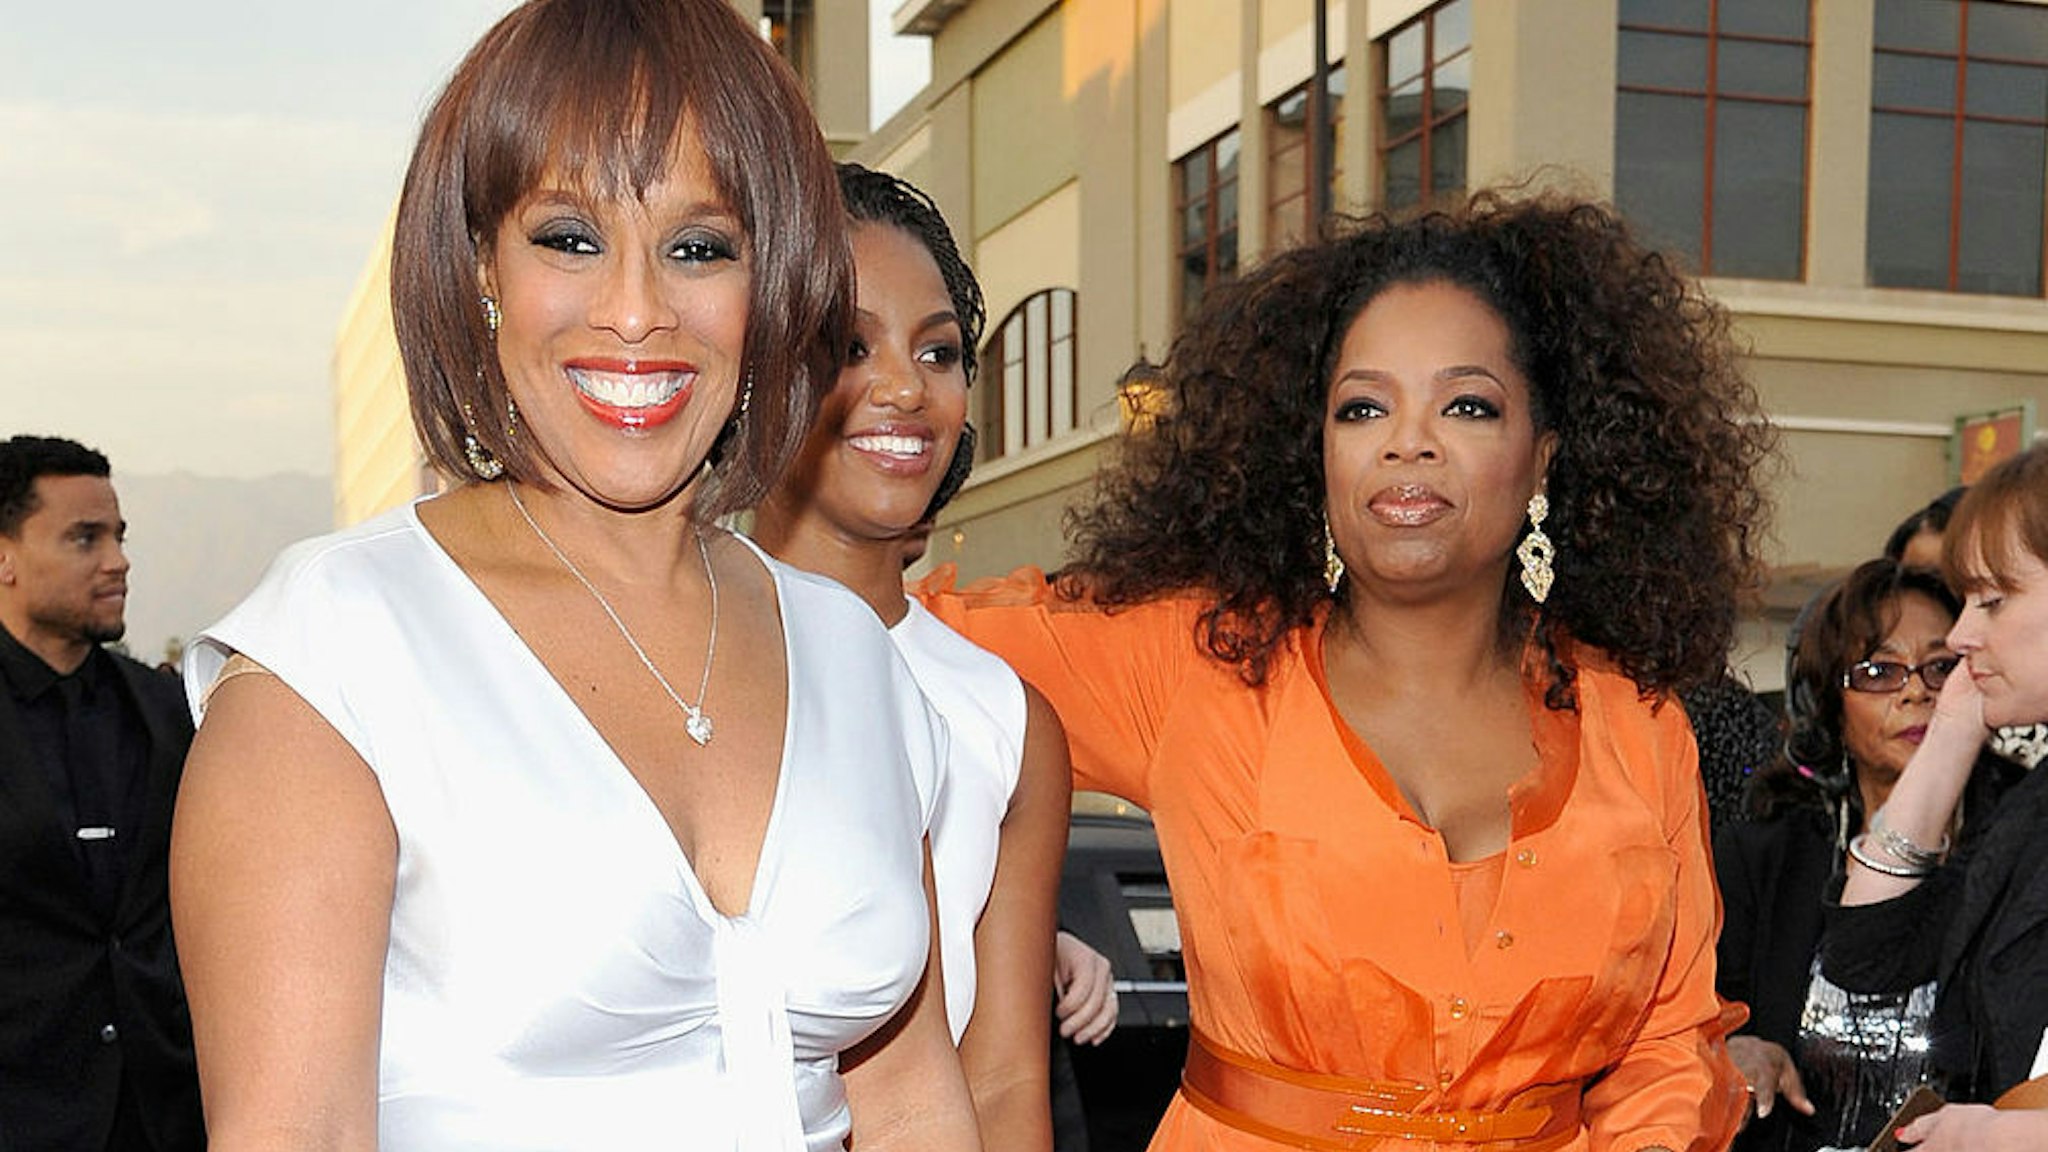 TV personality Gayle King, guest and Oprah Winfrey attend the 45th NAACP Image Awards presented by TV One at Pasadena Civic Auditorium on February 22, 2014 in Pasadena, California.